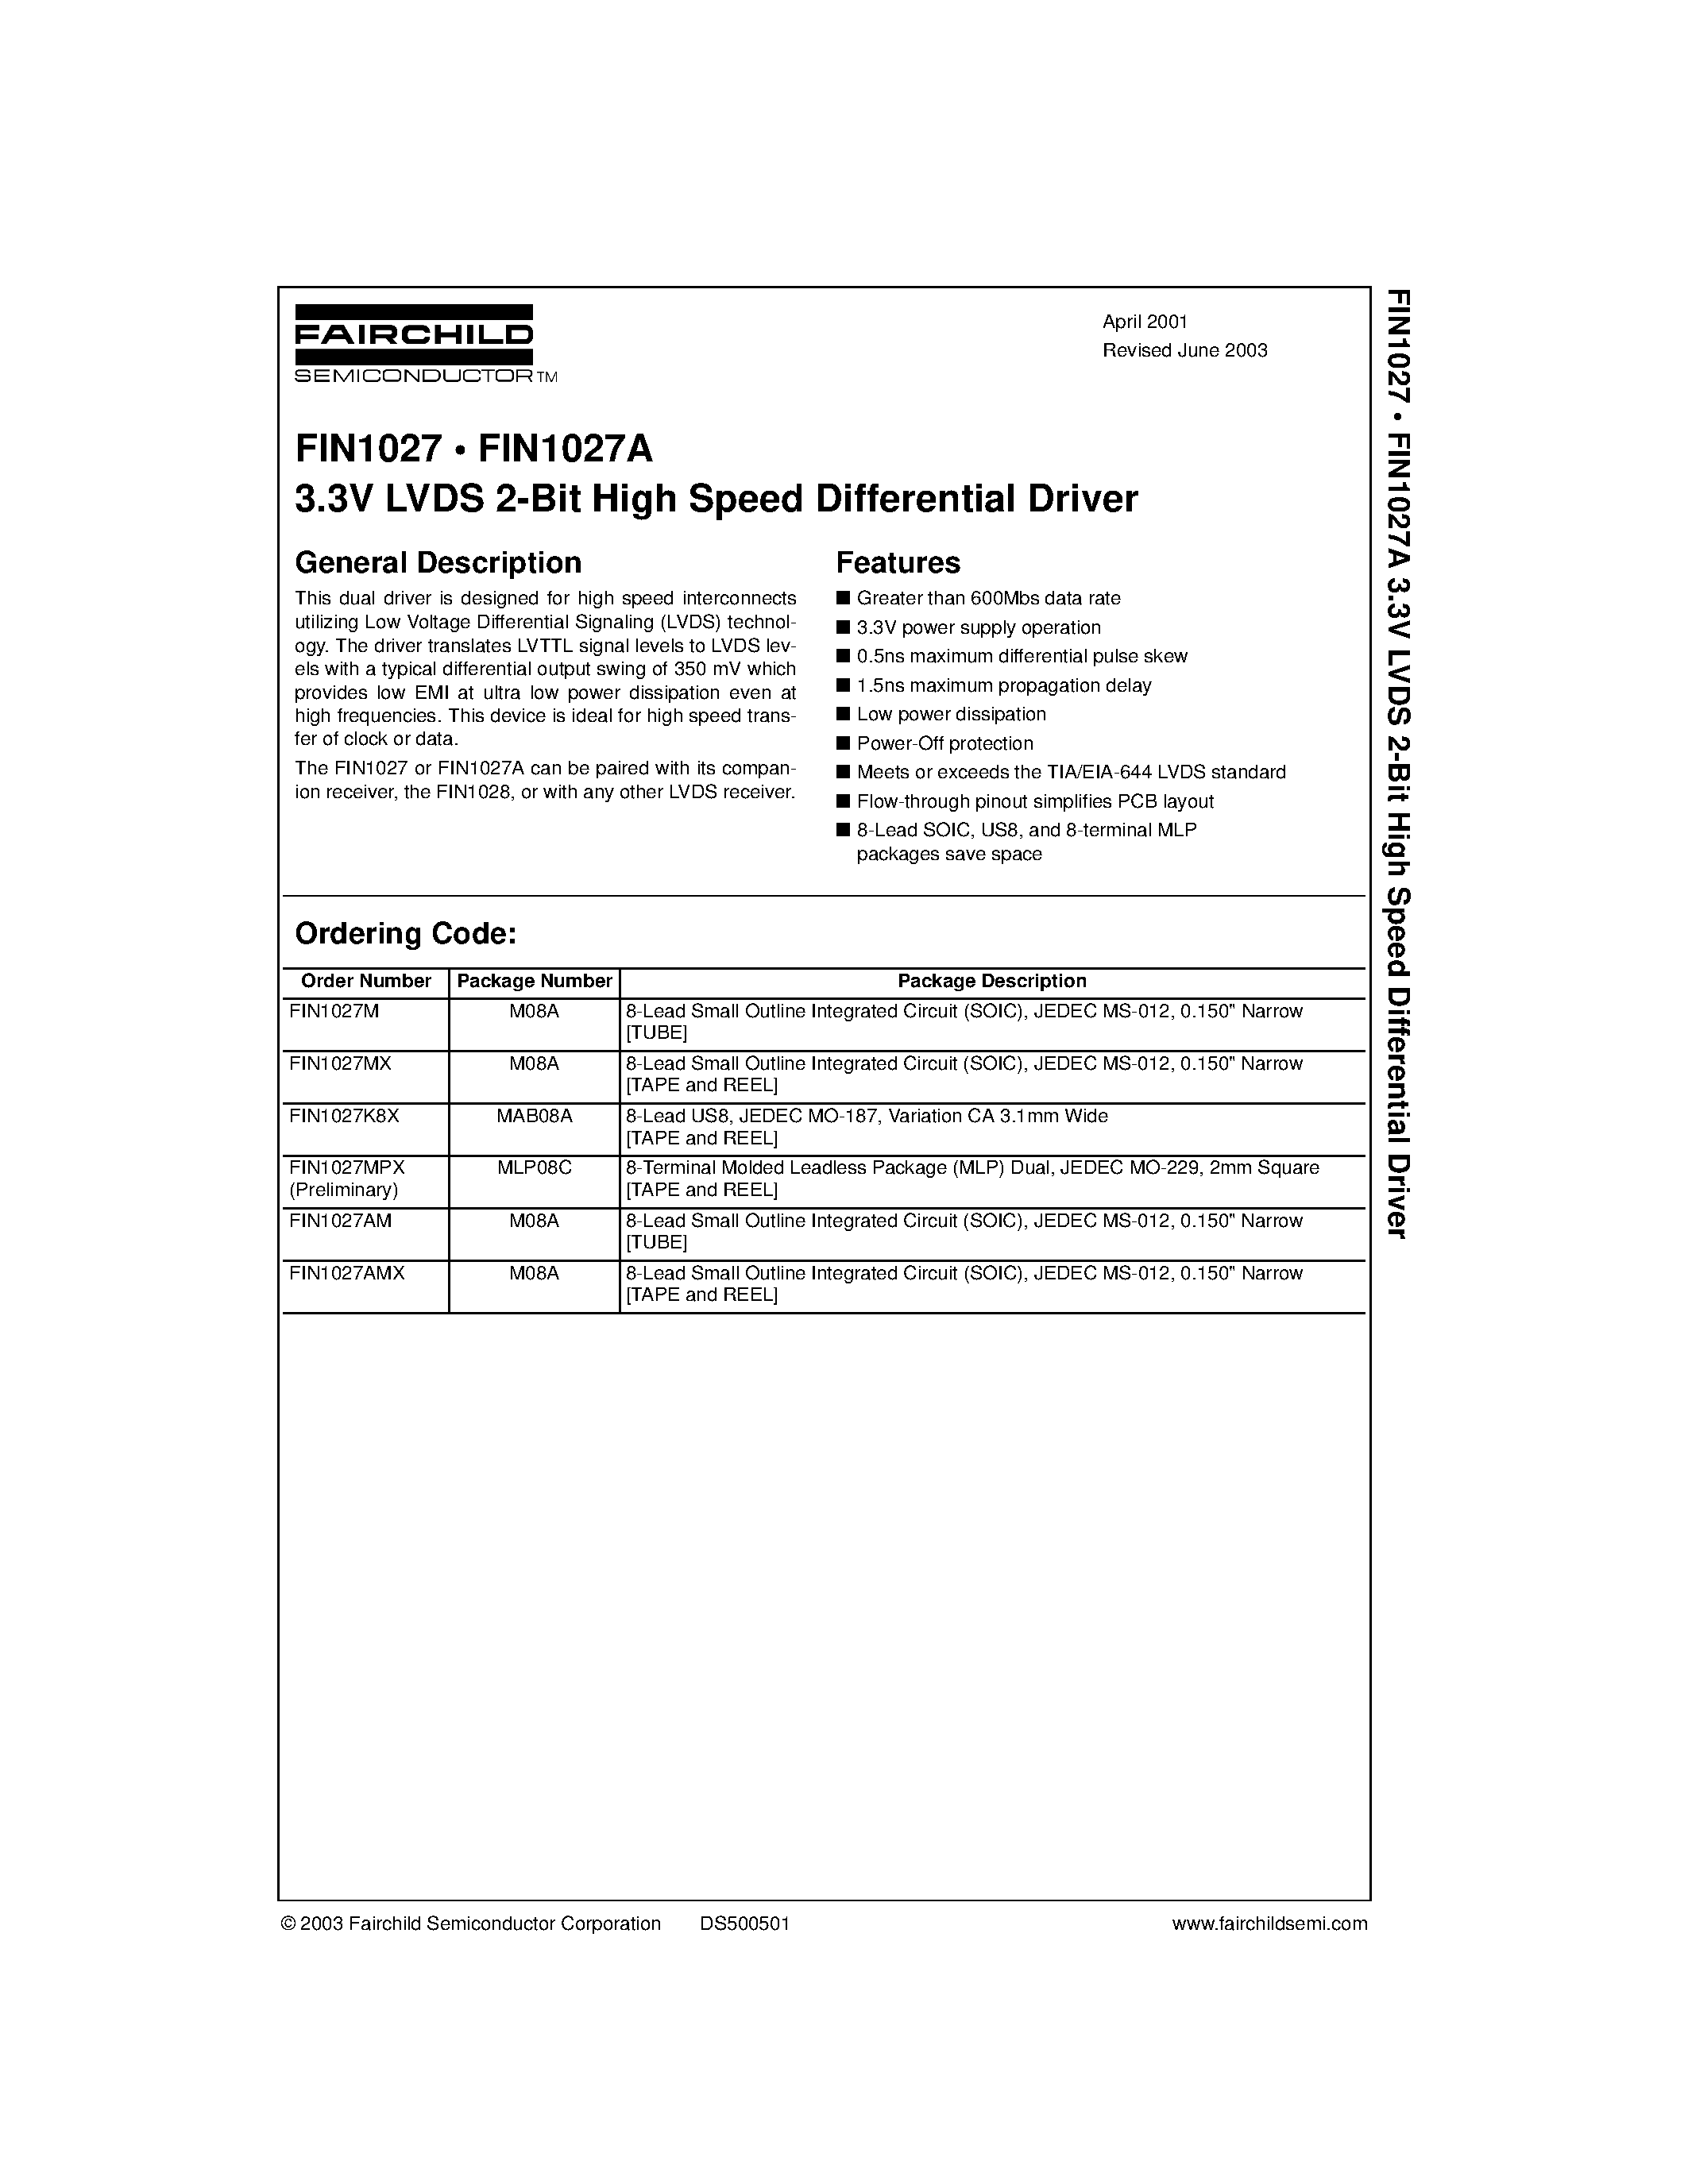 Datasheet FIN1027AMX - 3.3V LVDS 2-Bit High Speed Differential Driver page 1